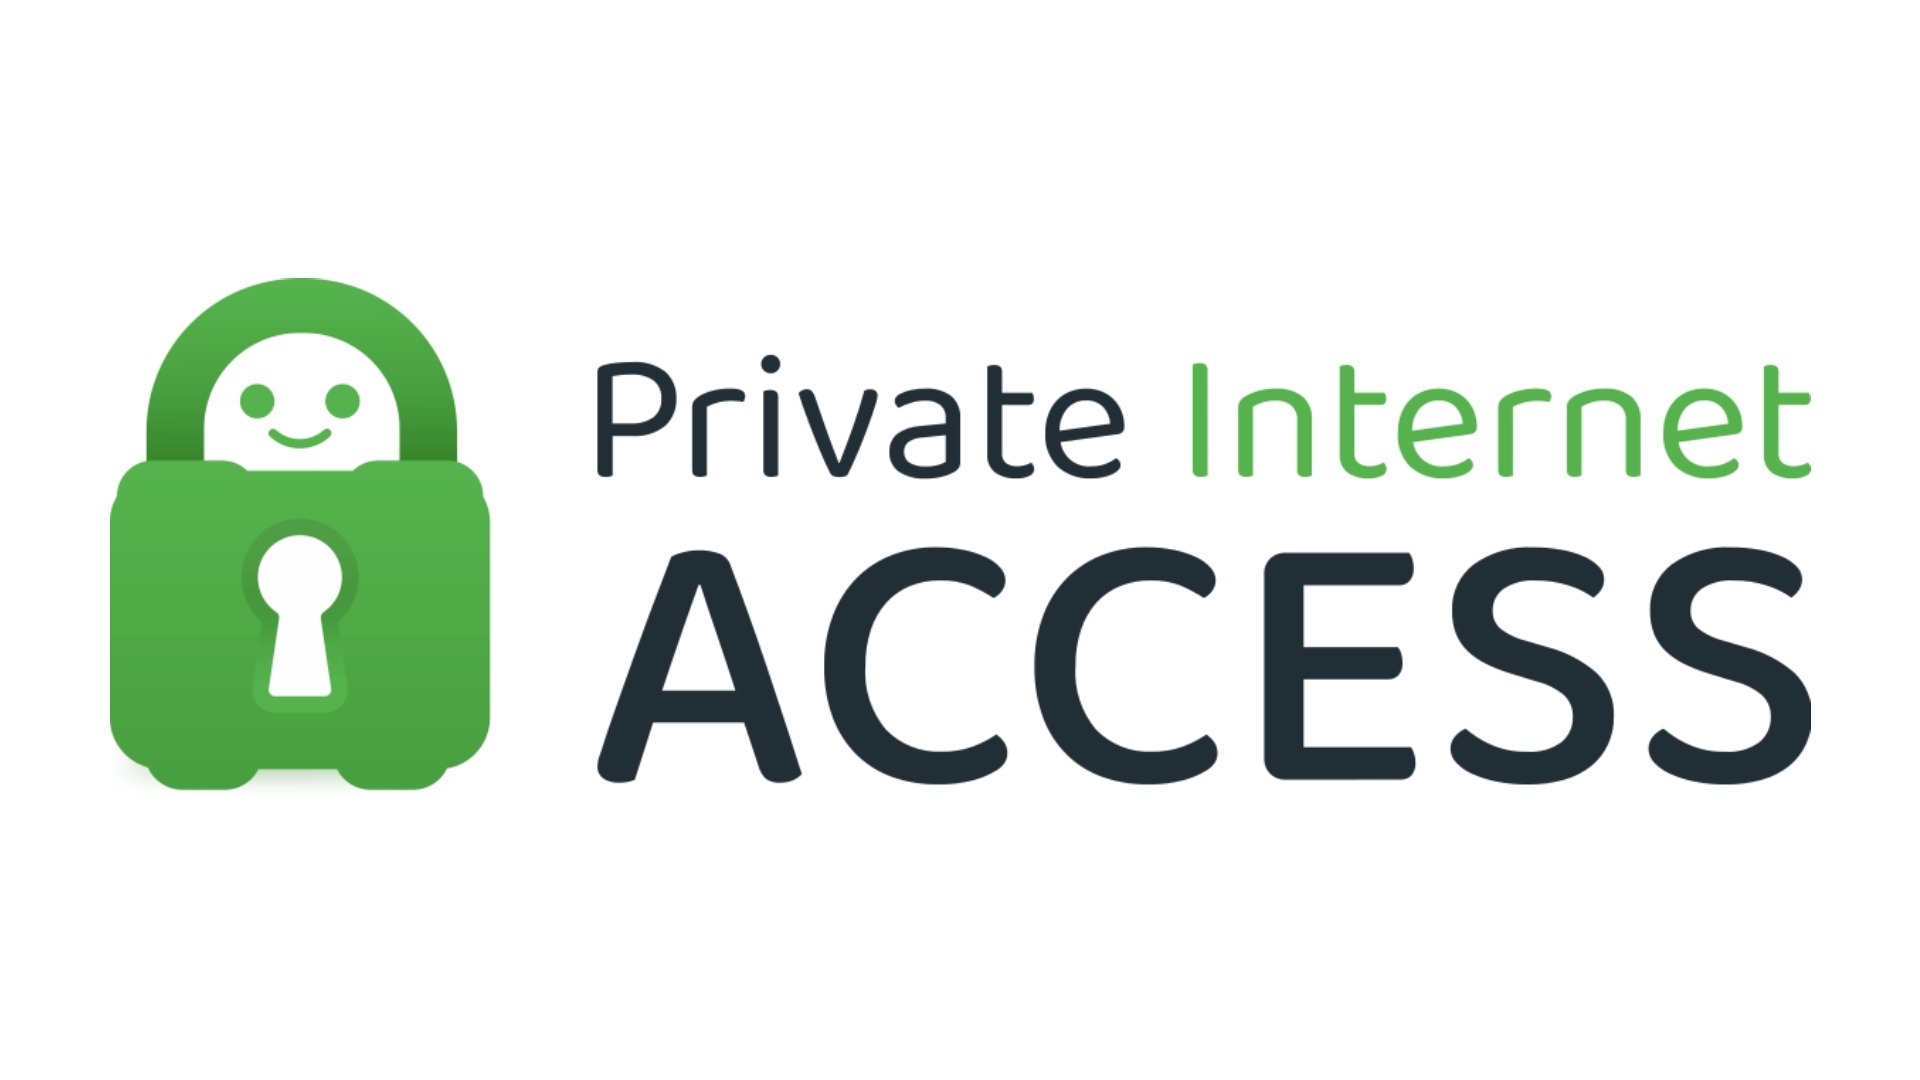 The best VPN for streaming, Private Internet Access,. Image shows its logo on a white background.